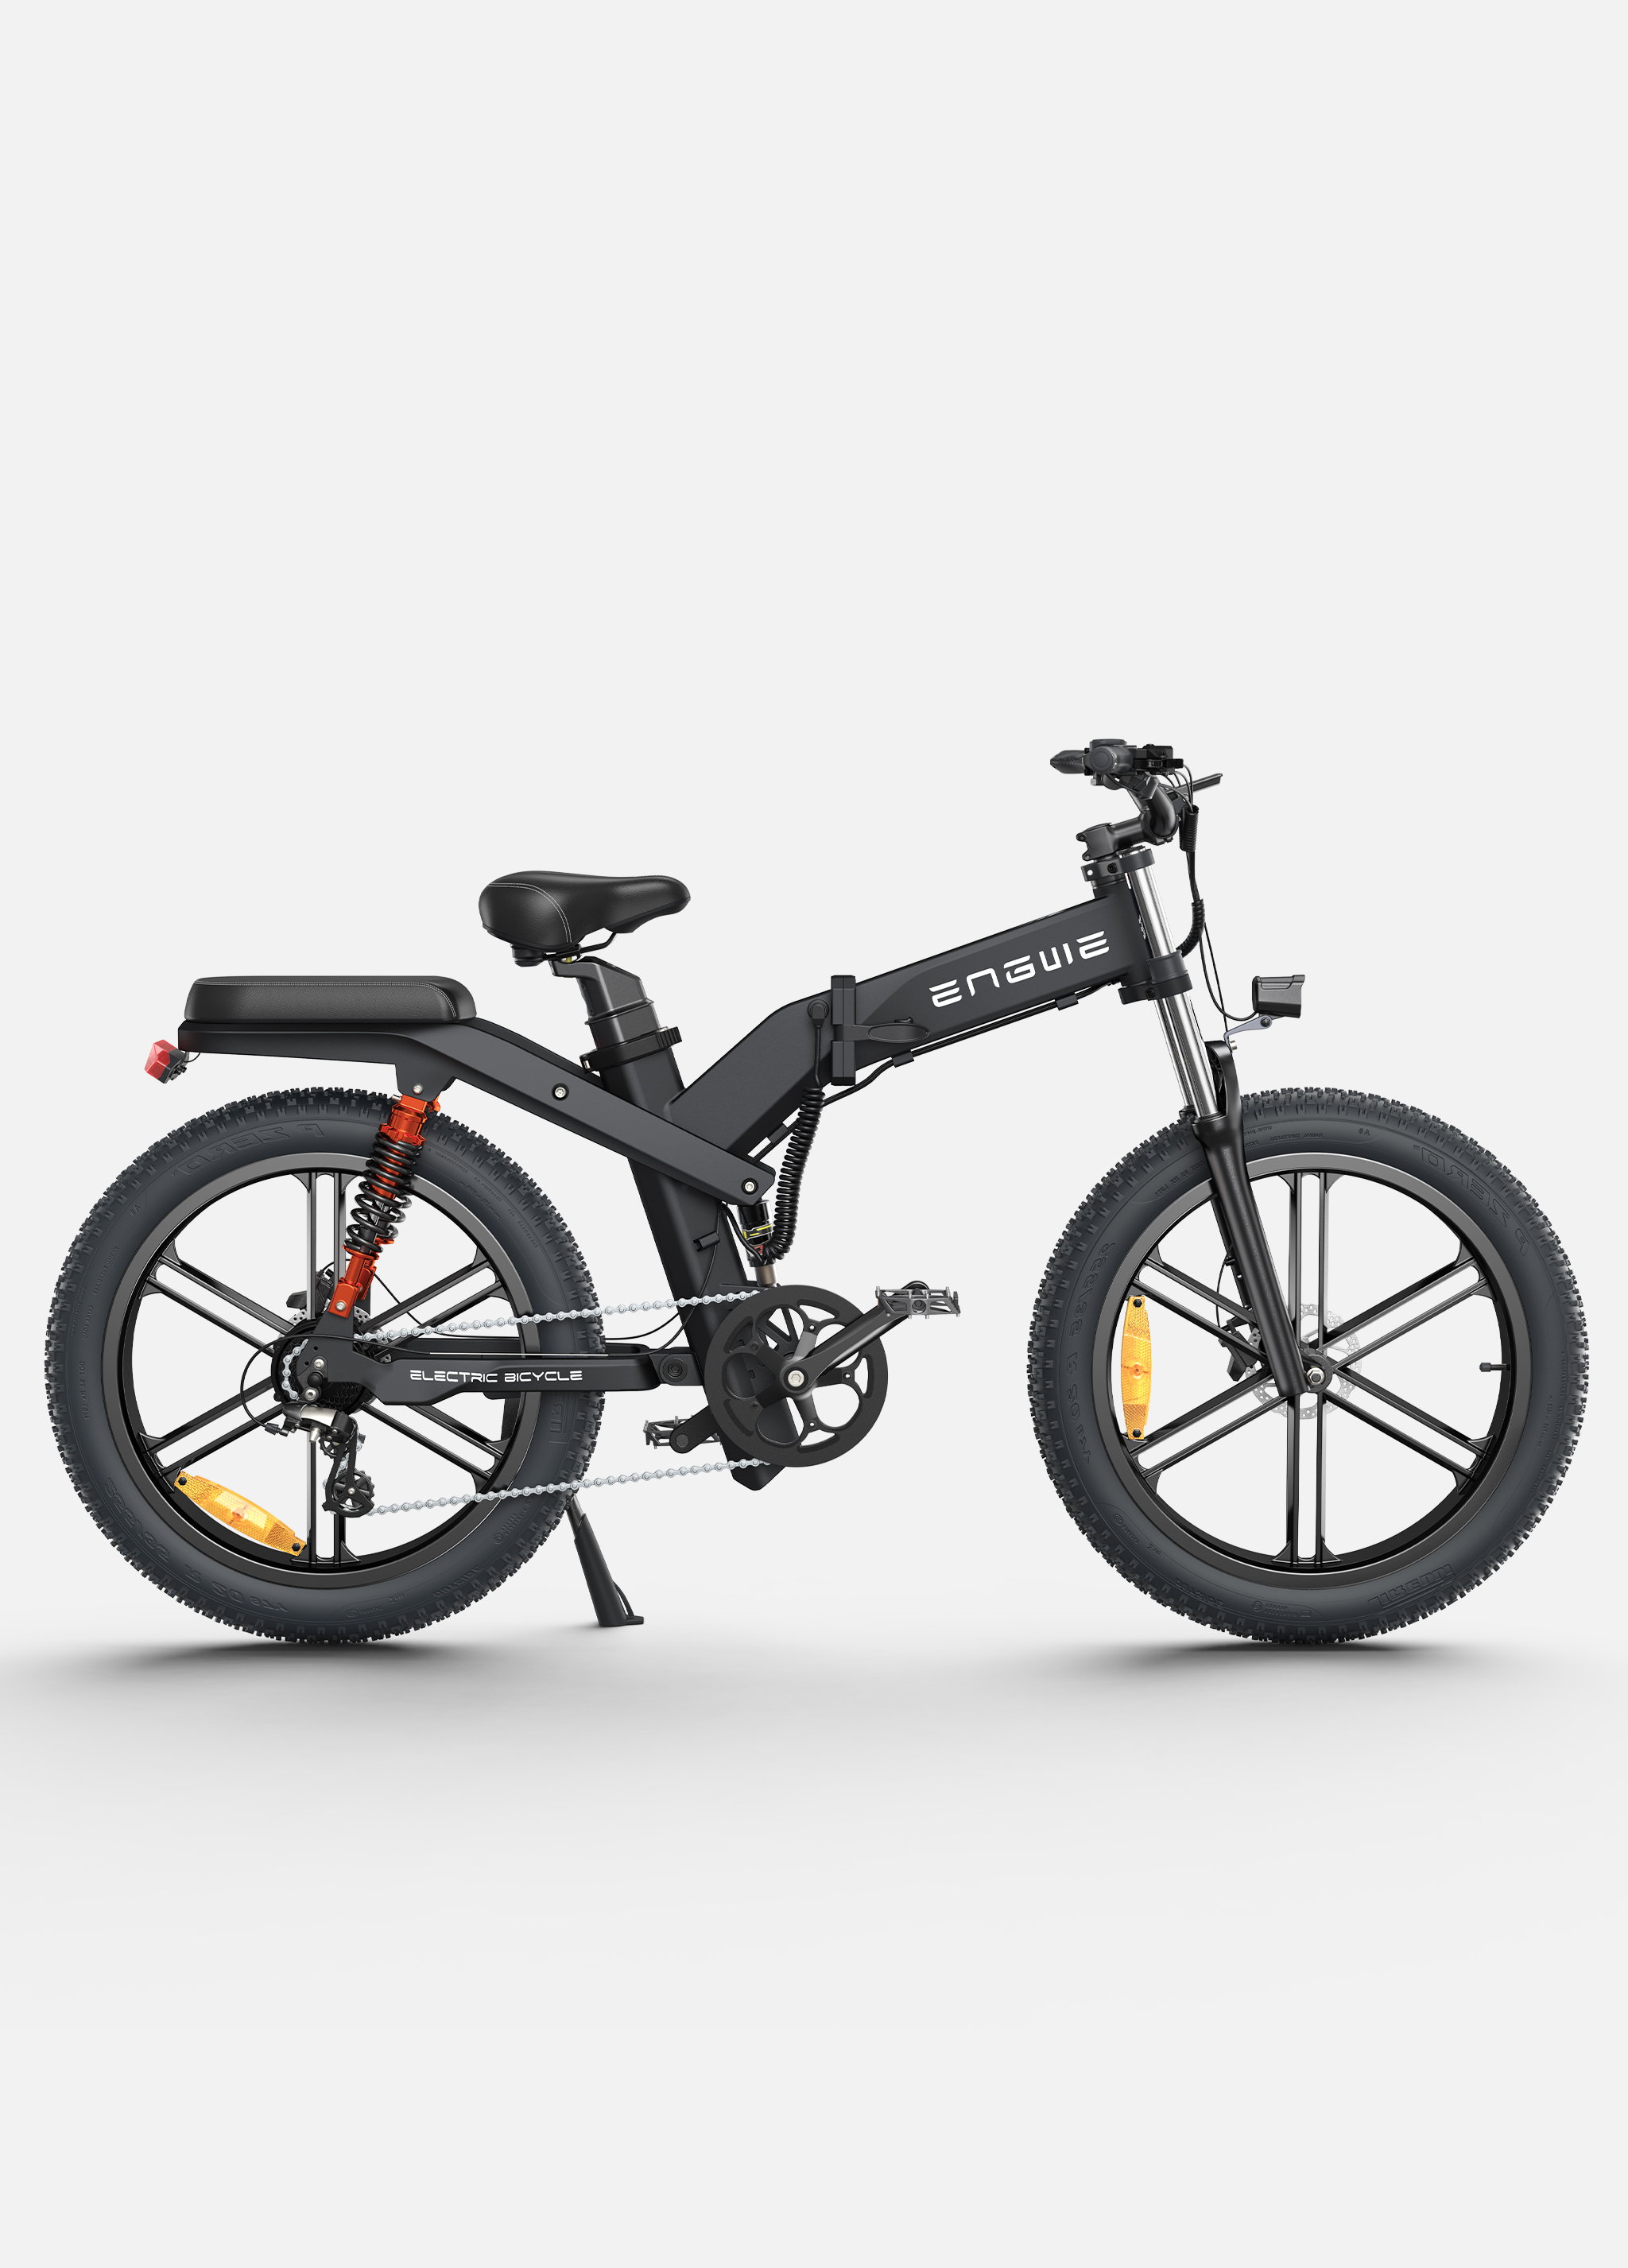 Electric Bike Fat Tire 750w Engwe X20 High End Foldable Electric Bicycle Full Suspension